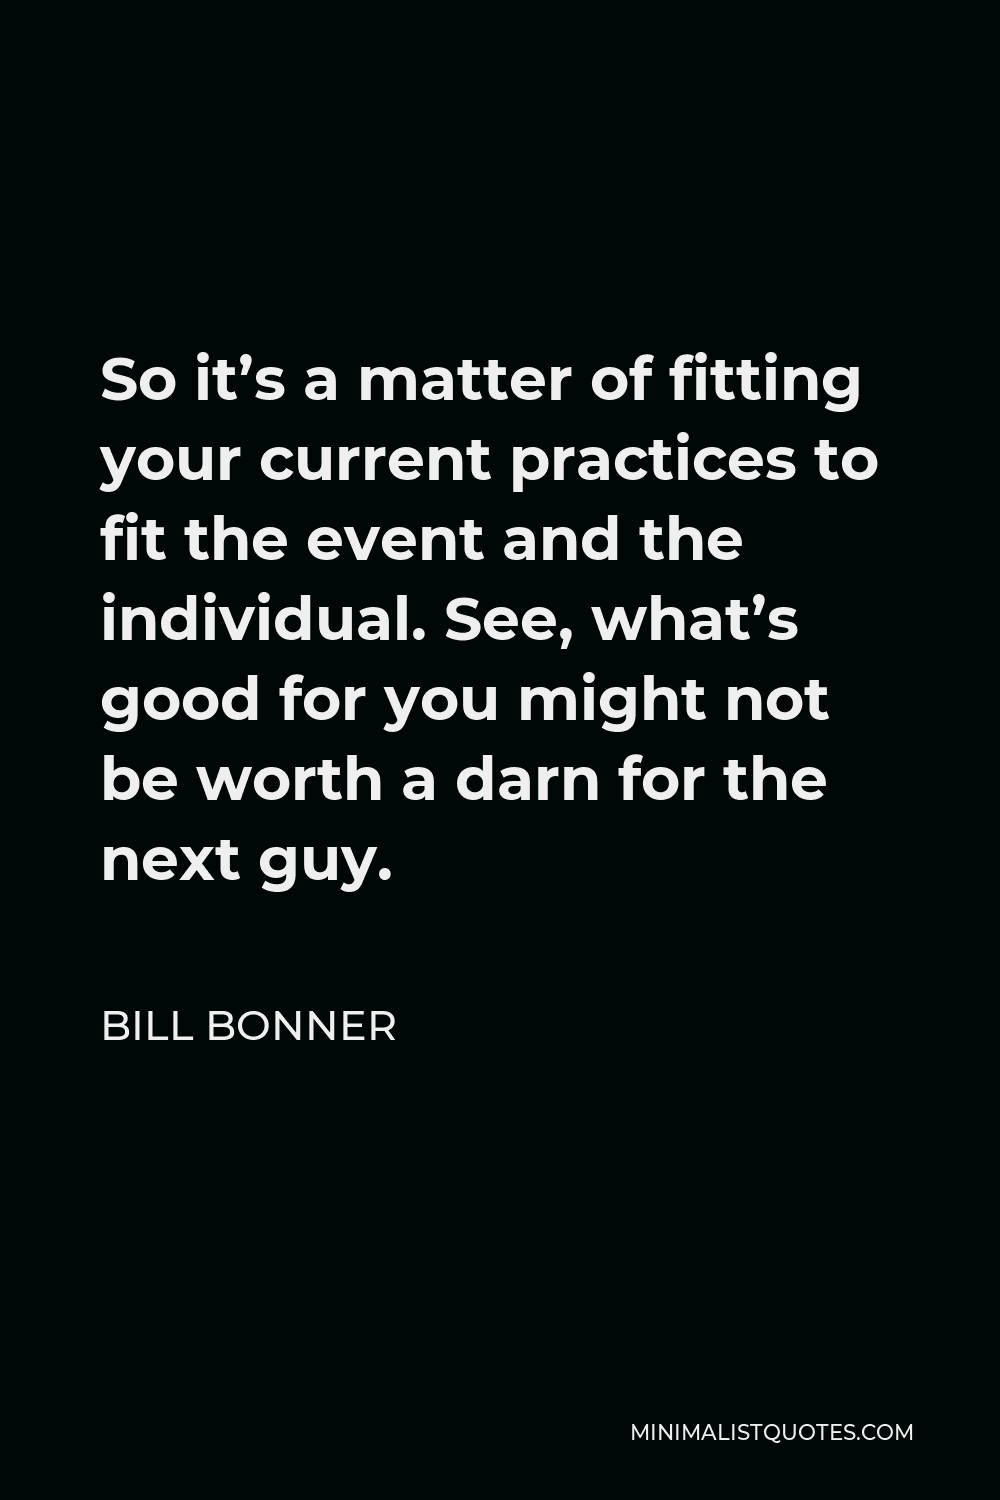 Bill Bonner Quote - So it’s a matter of fitting your current practices to fit the event and the individual. See, what’s good for you might not be worth a darn for the next guy.